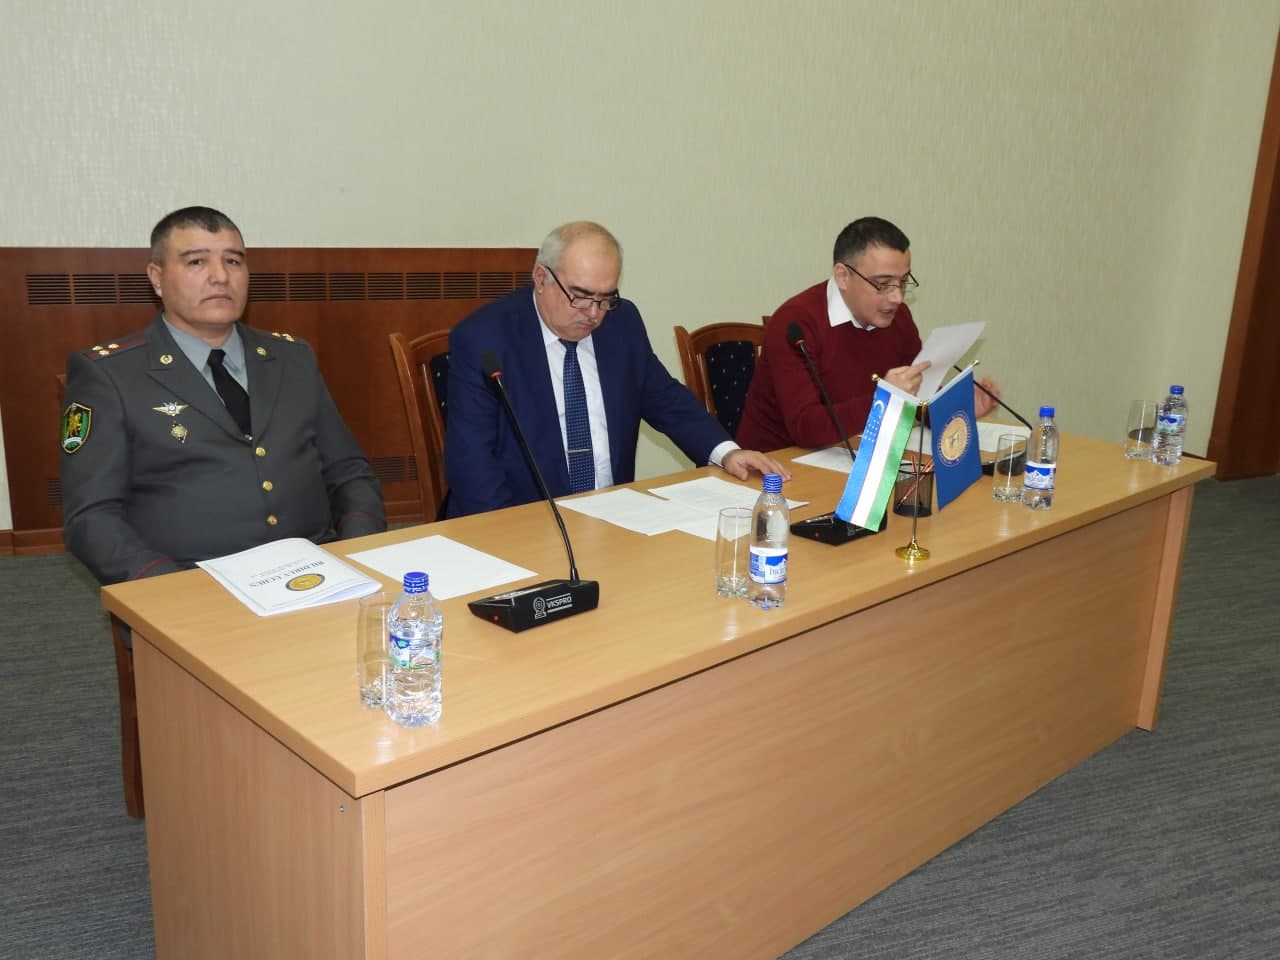 A meeting of the Scientific Council was held to turn the Victory Park memorial complex into a scientific center for the study of military history and heroism of our ancestors, especially for young people